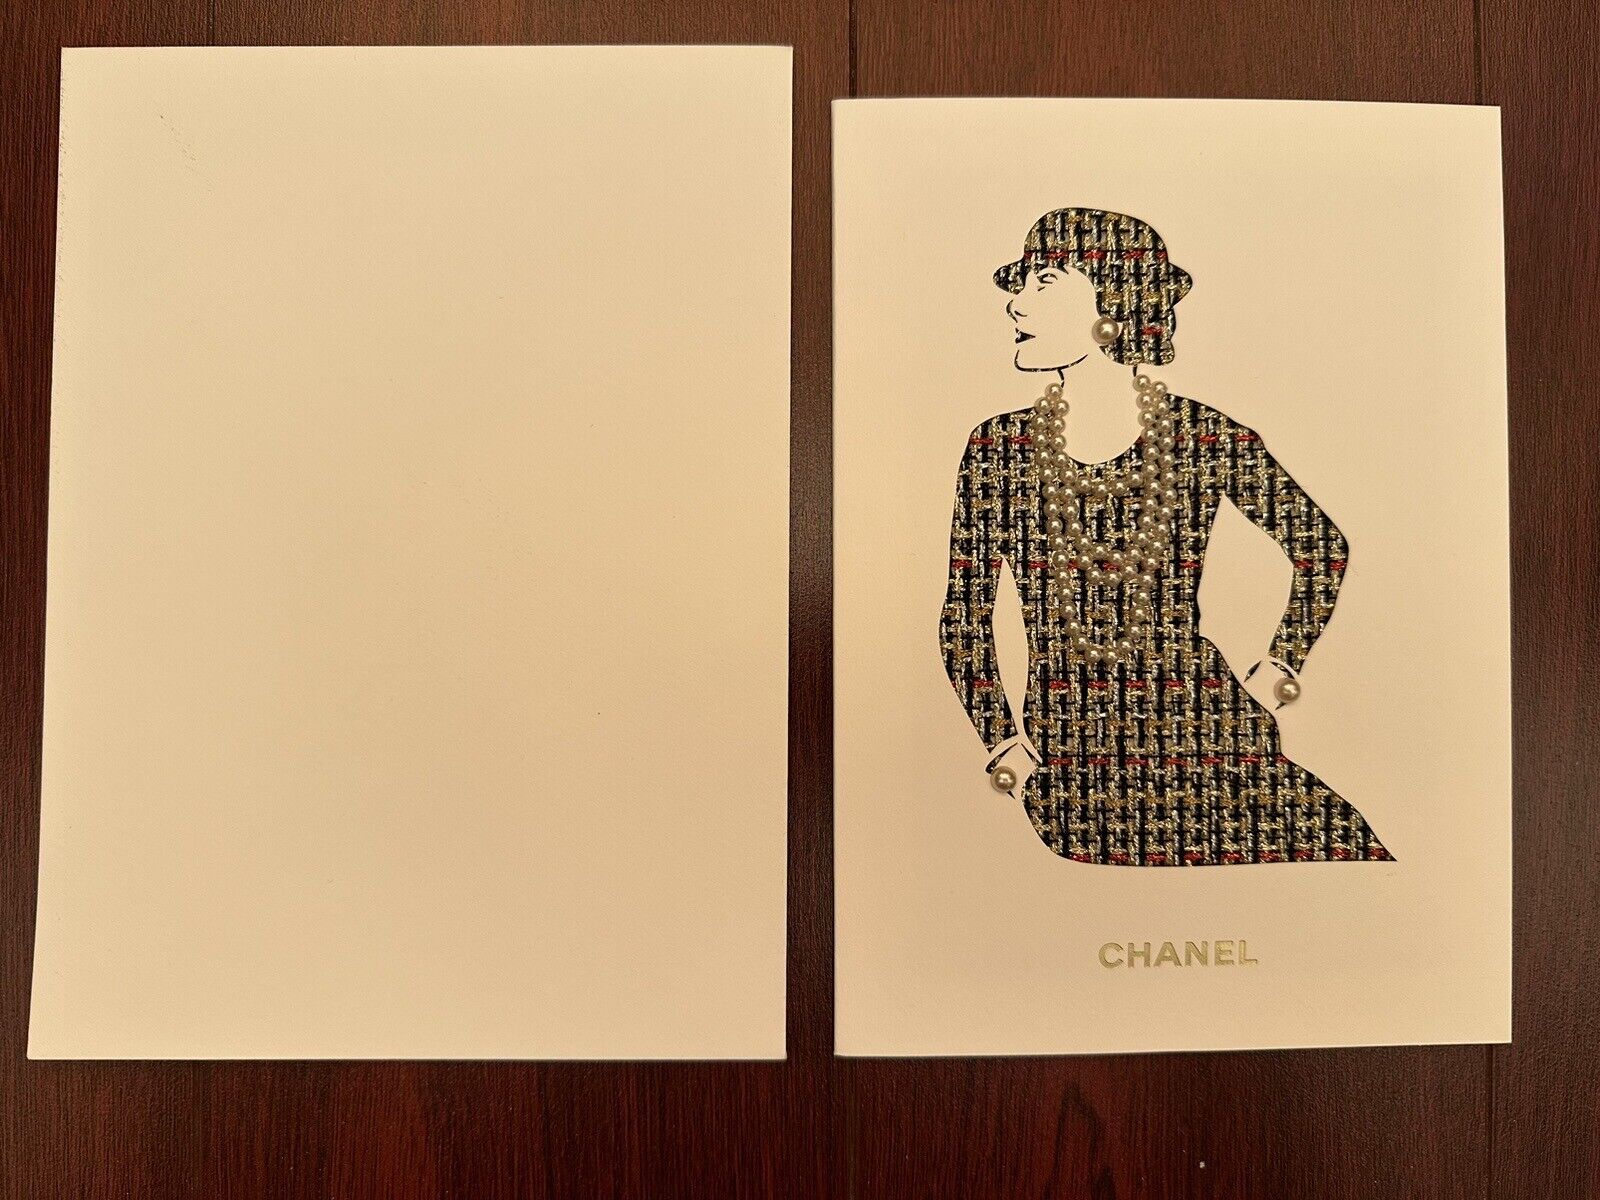 100% Authentic Chanel Pearls Tweed Card Rare Brand New Gift VIP Greeting Card CC